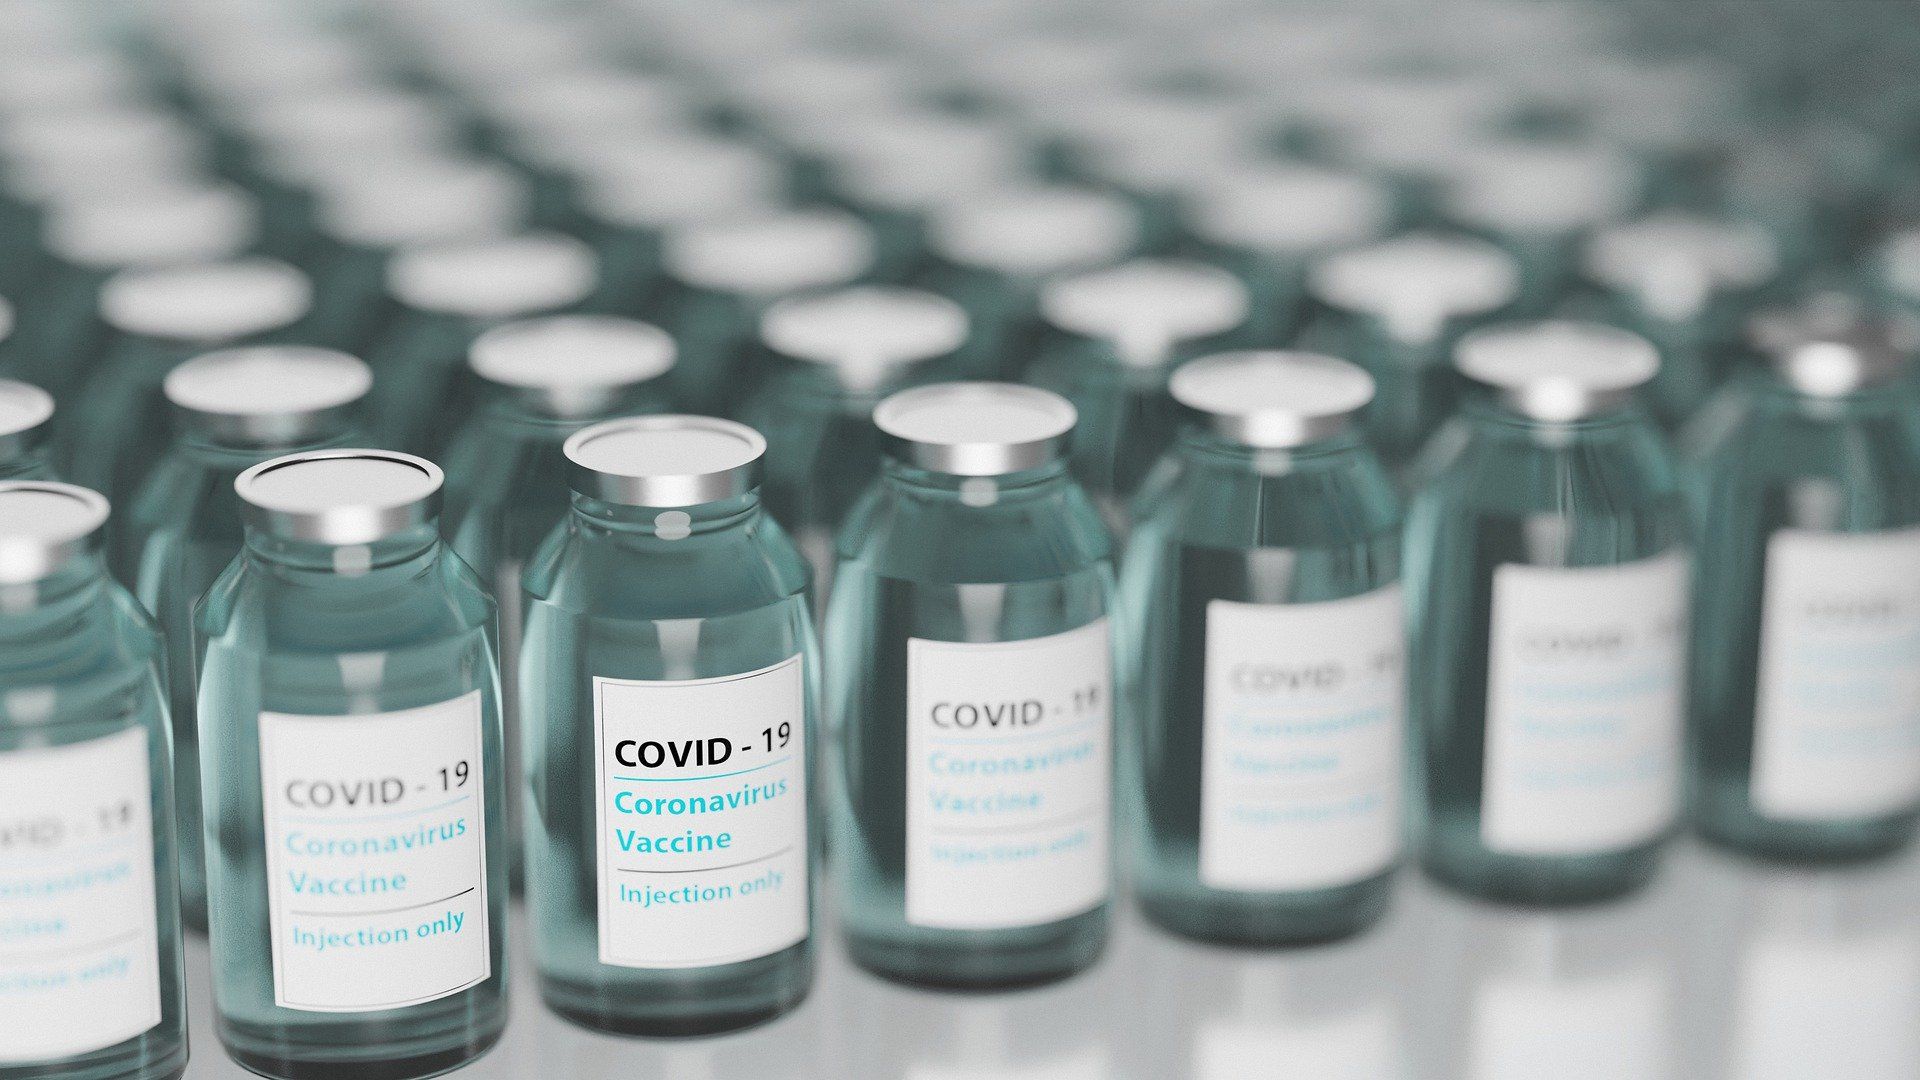 Italy declares Johnson & Johnson COVID-19 vaccine ‘safe’, to use it for people over 60